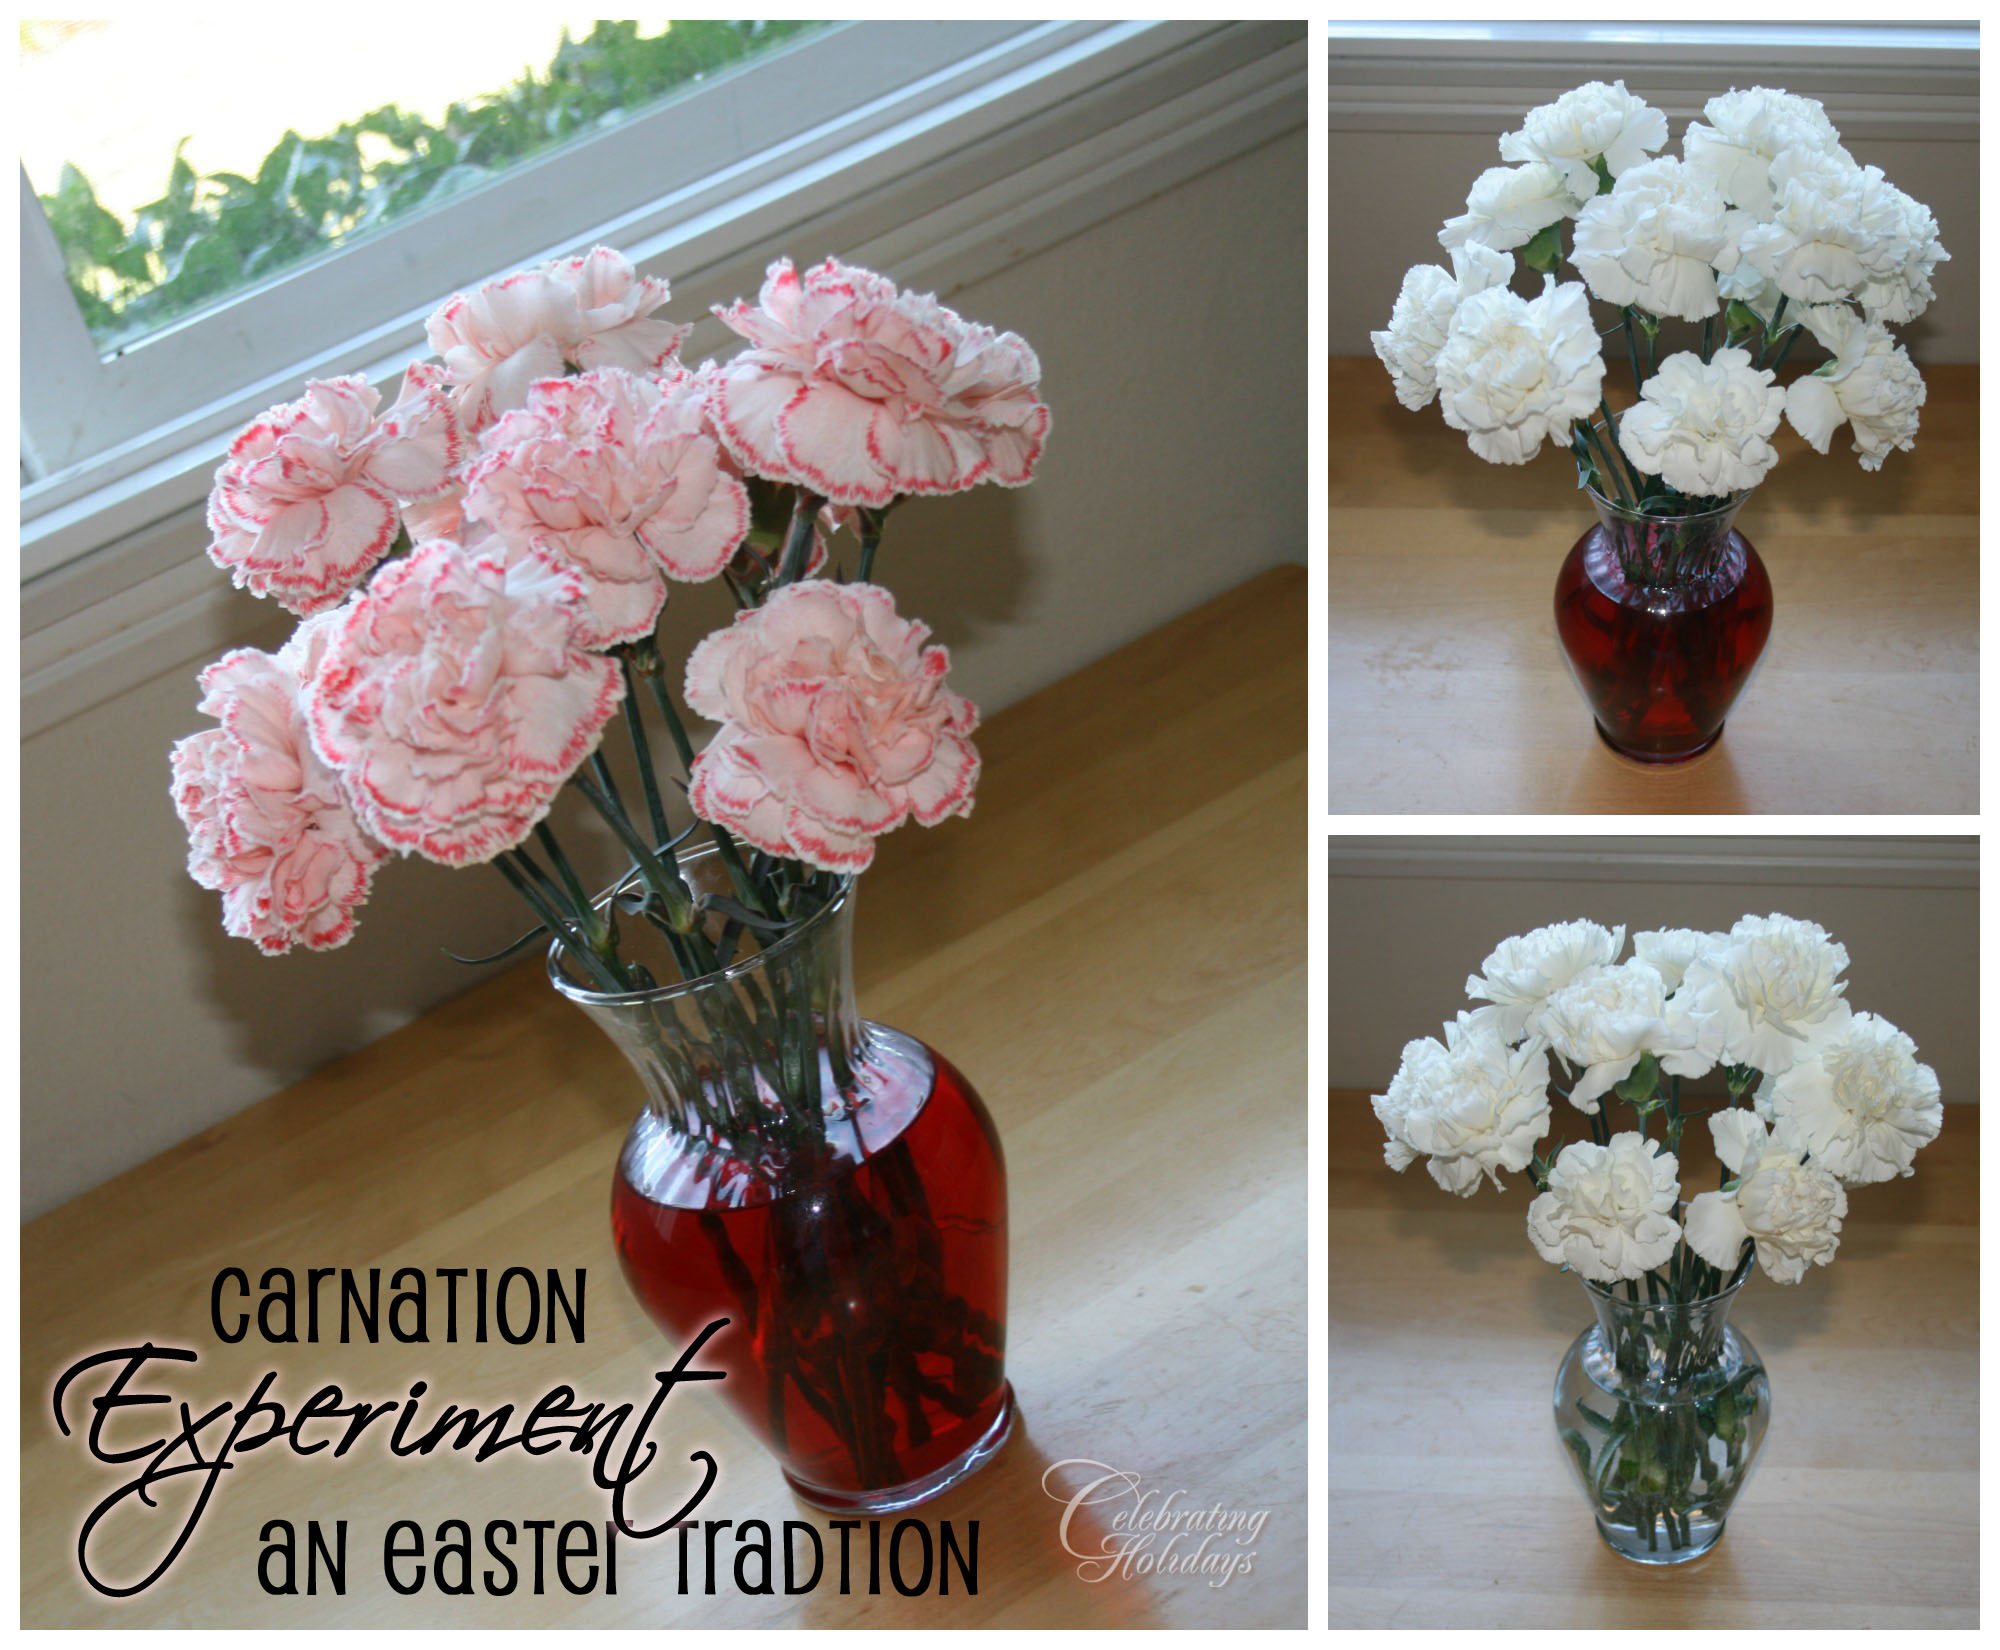 Carnation Experiment for Easter